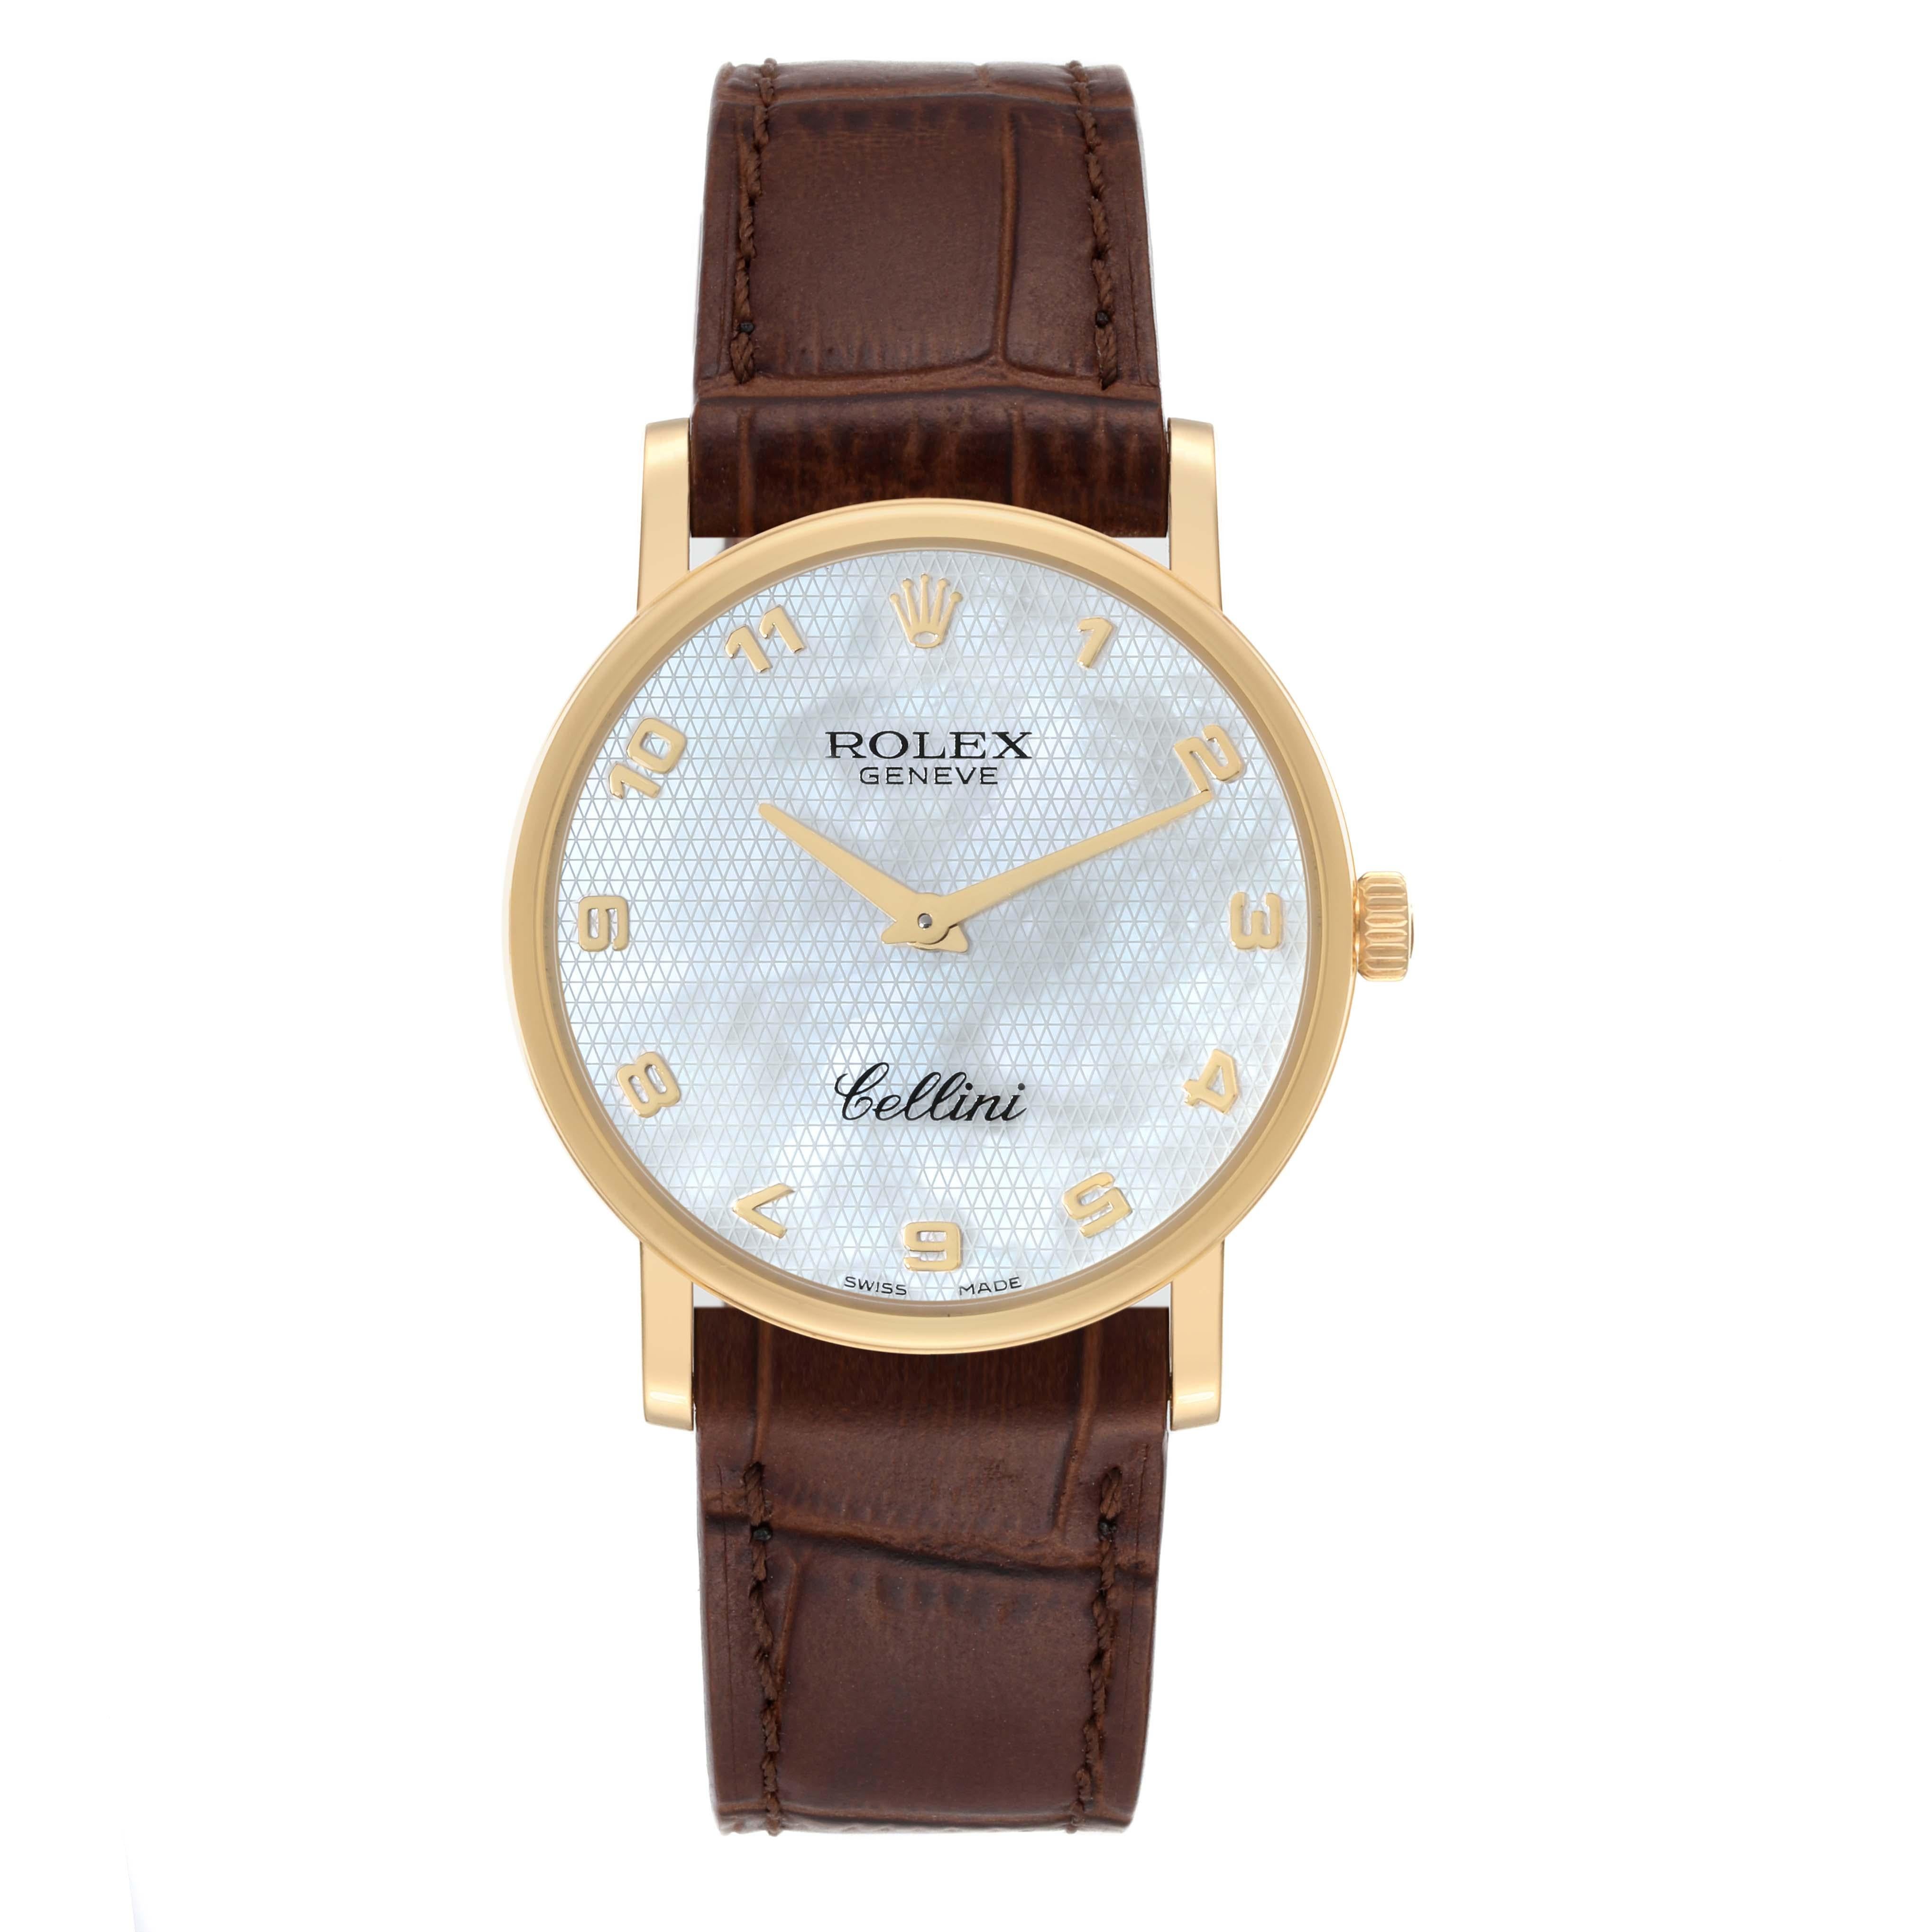 Rolex Cellini Classic Yellow Gold Mother of Pearl Dial Mens Watch 5115 Card. Manual winding movement. 18K yellow gold slim case 32mm in diameter. 5.5mm case thickness. Rolex logo on the crown. . Scratch resistant sapphire crystal. Flat profile.